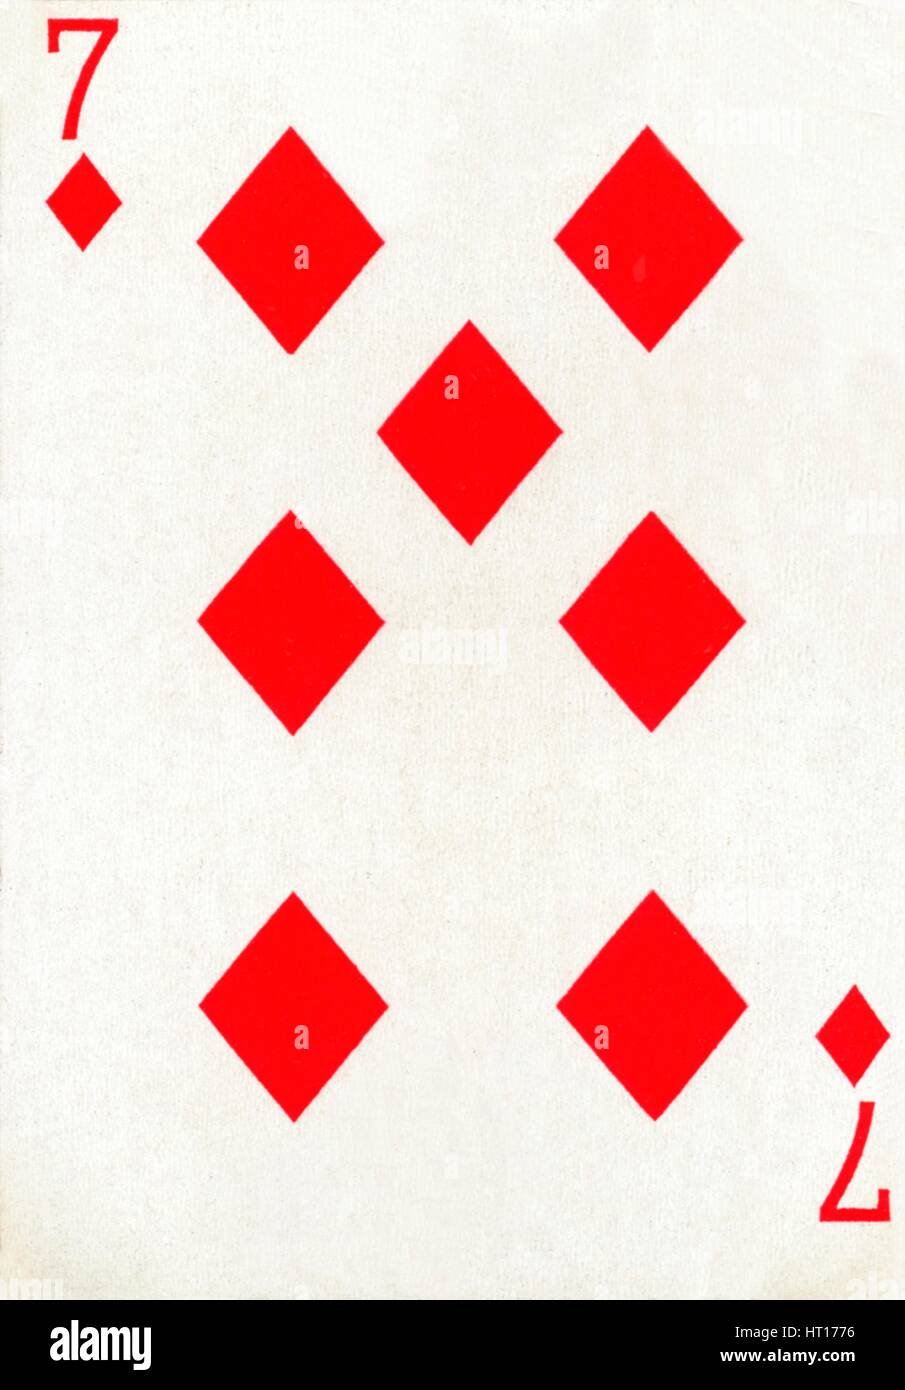 7 of Diamonds from a deck of Goodall & Son Ltd. playing cards, c1940.  Artist: Unknown. Stock Photo